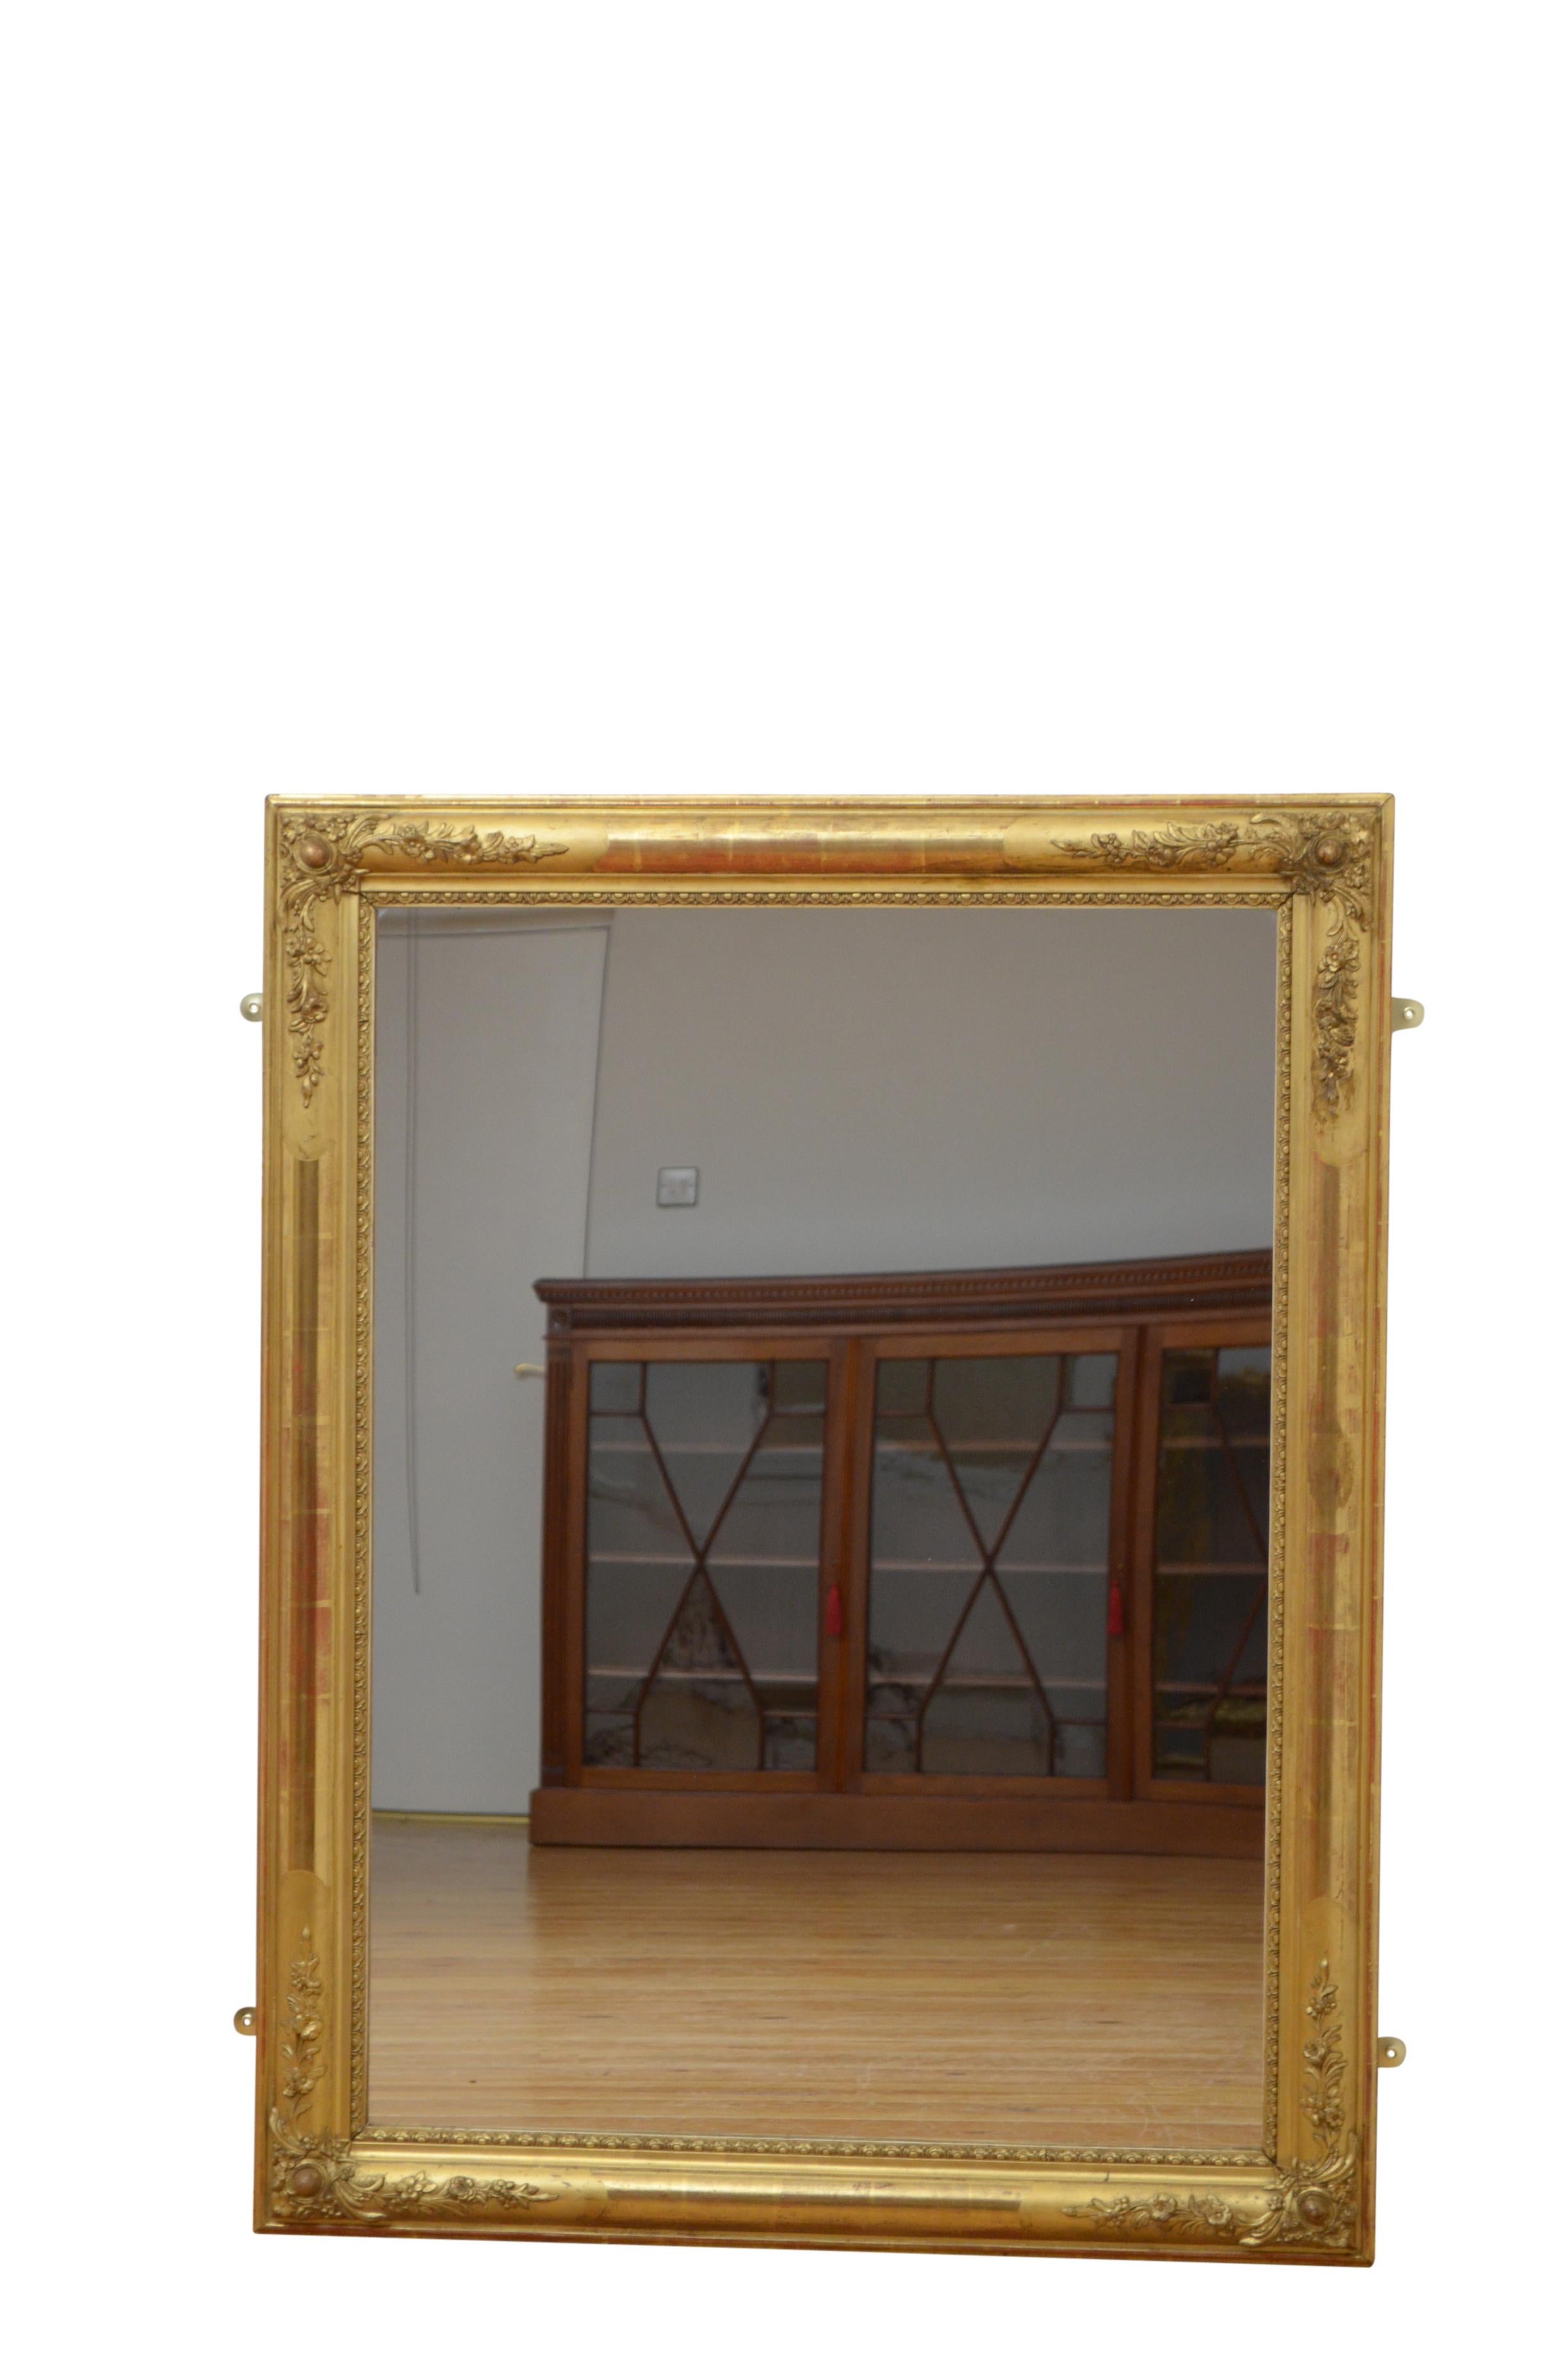 Very attractive giltwood wall mirror of versatile form, it can be hung horizontal or vertical way, having replacement glass in moulded and gilded frame with floral decorated corners. This antique mirror retains original gilt with replacement back.